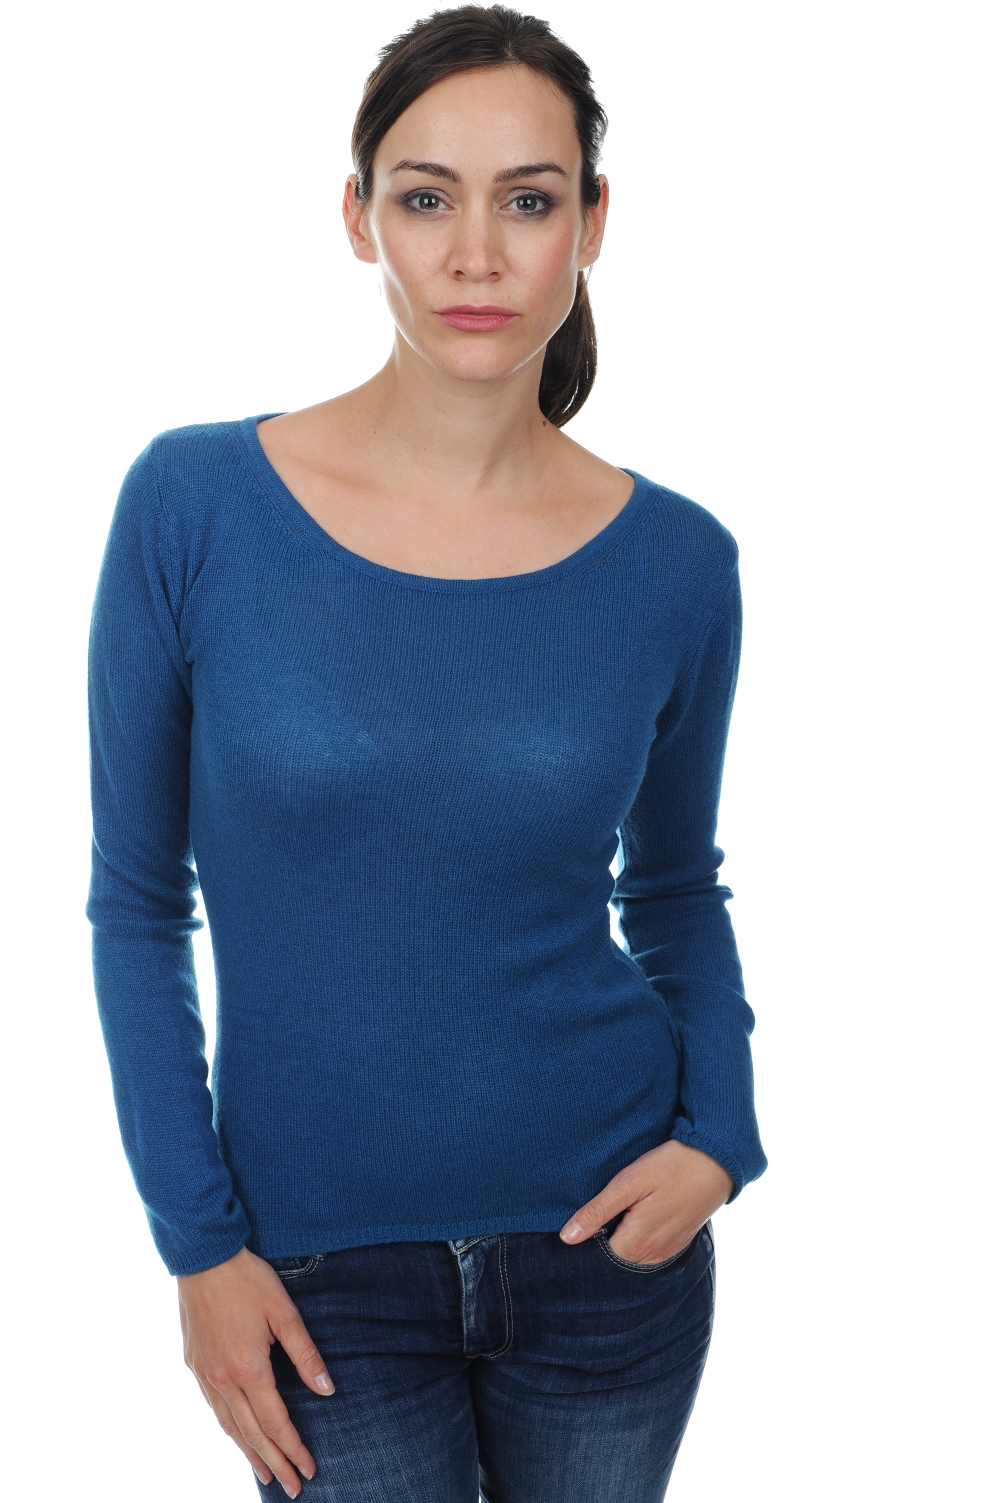 Cashmere ladies basic sweaters at low prices caleen canard blue 4xl